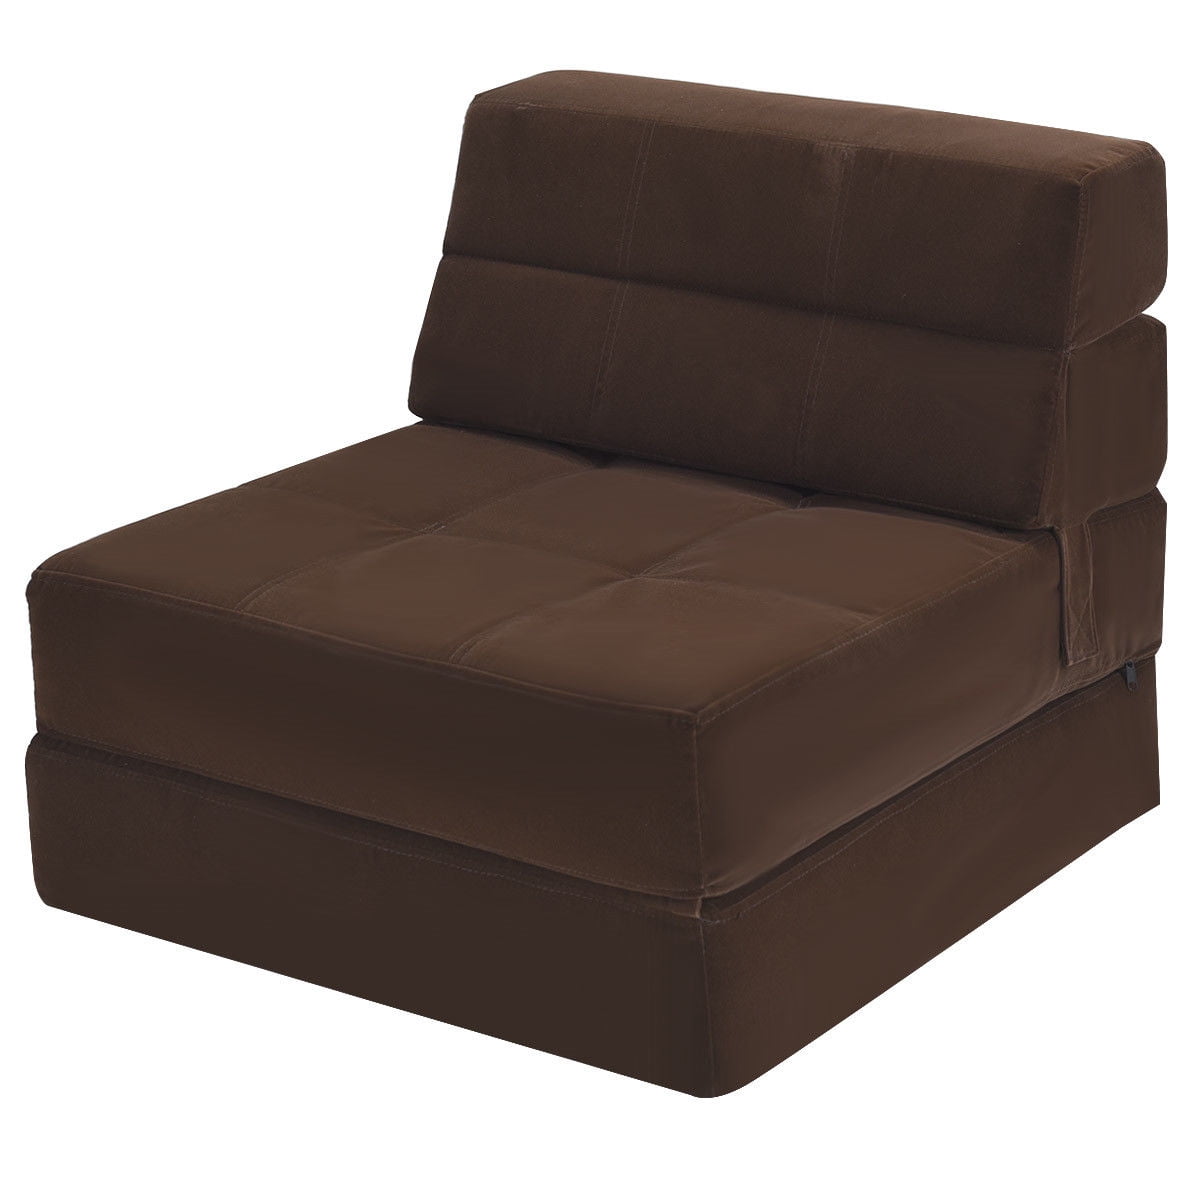 Costway TriFold Fold Down Chair Flip Out Lounger